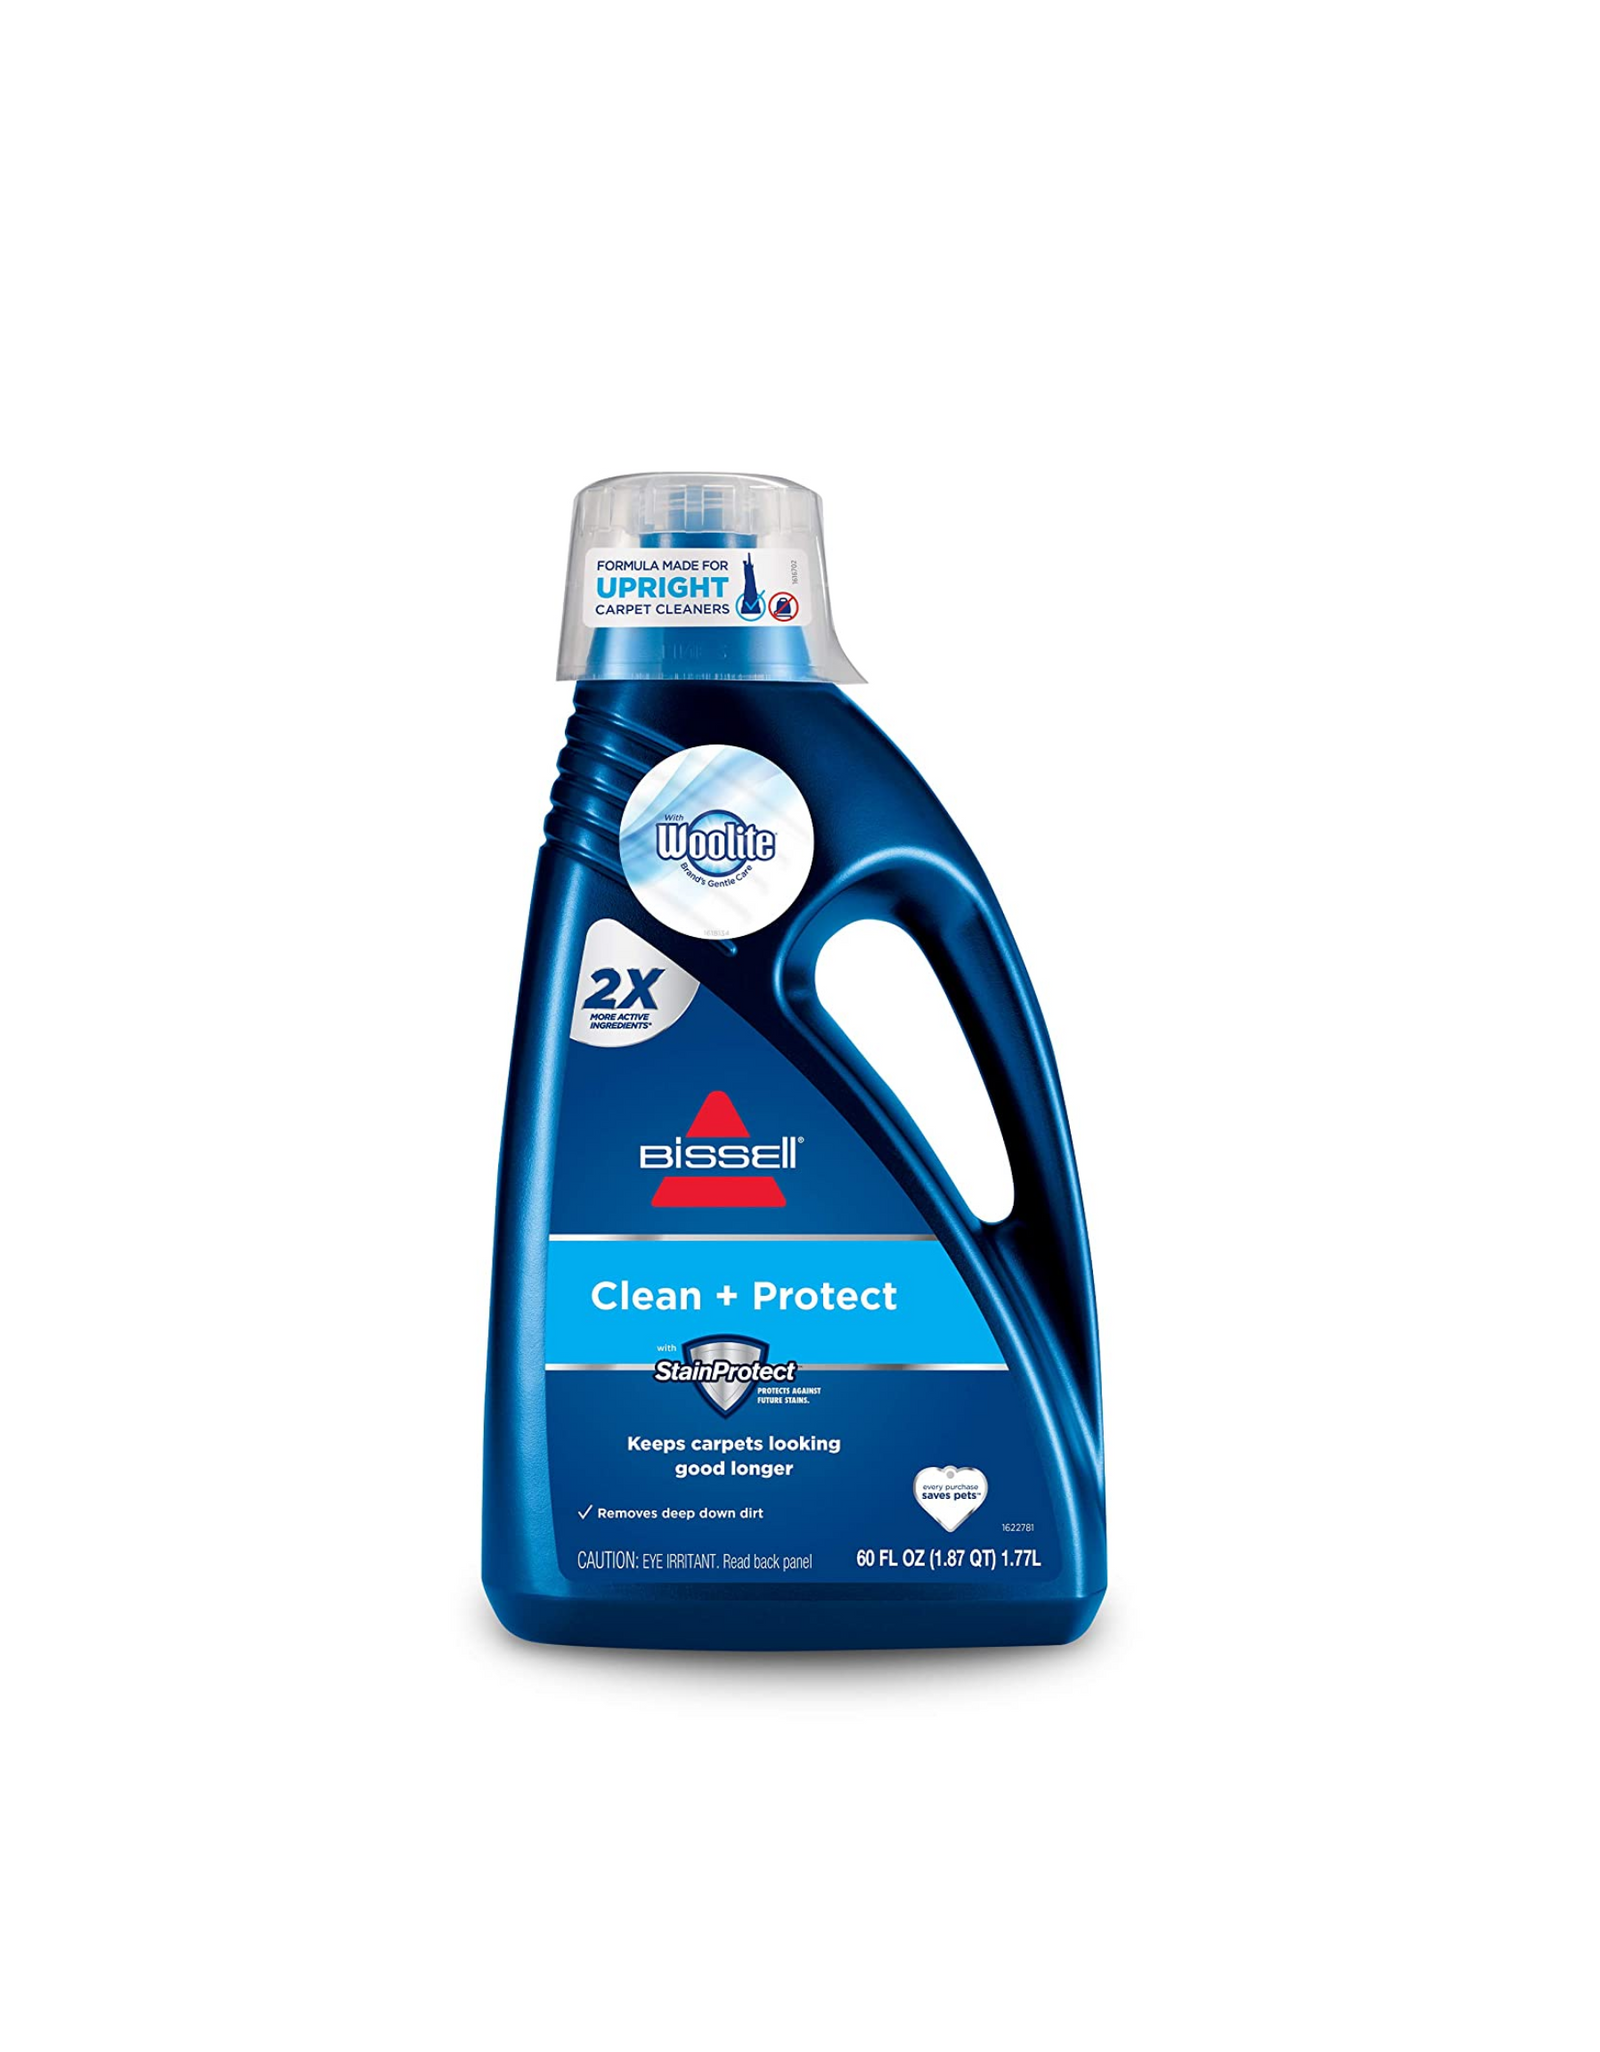 BISSELL 62E5A 2X Concentrated Deep Clean & Protect Full Size Machine Formula, Removes Deep Down Dirt, 60 fl oz